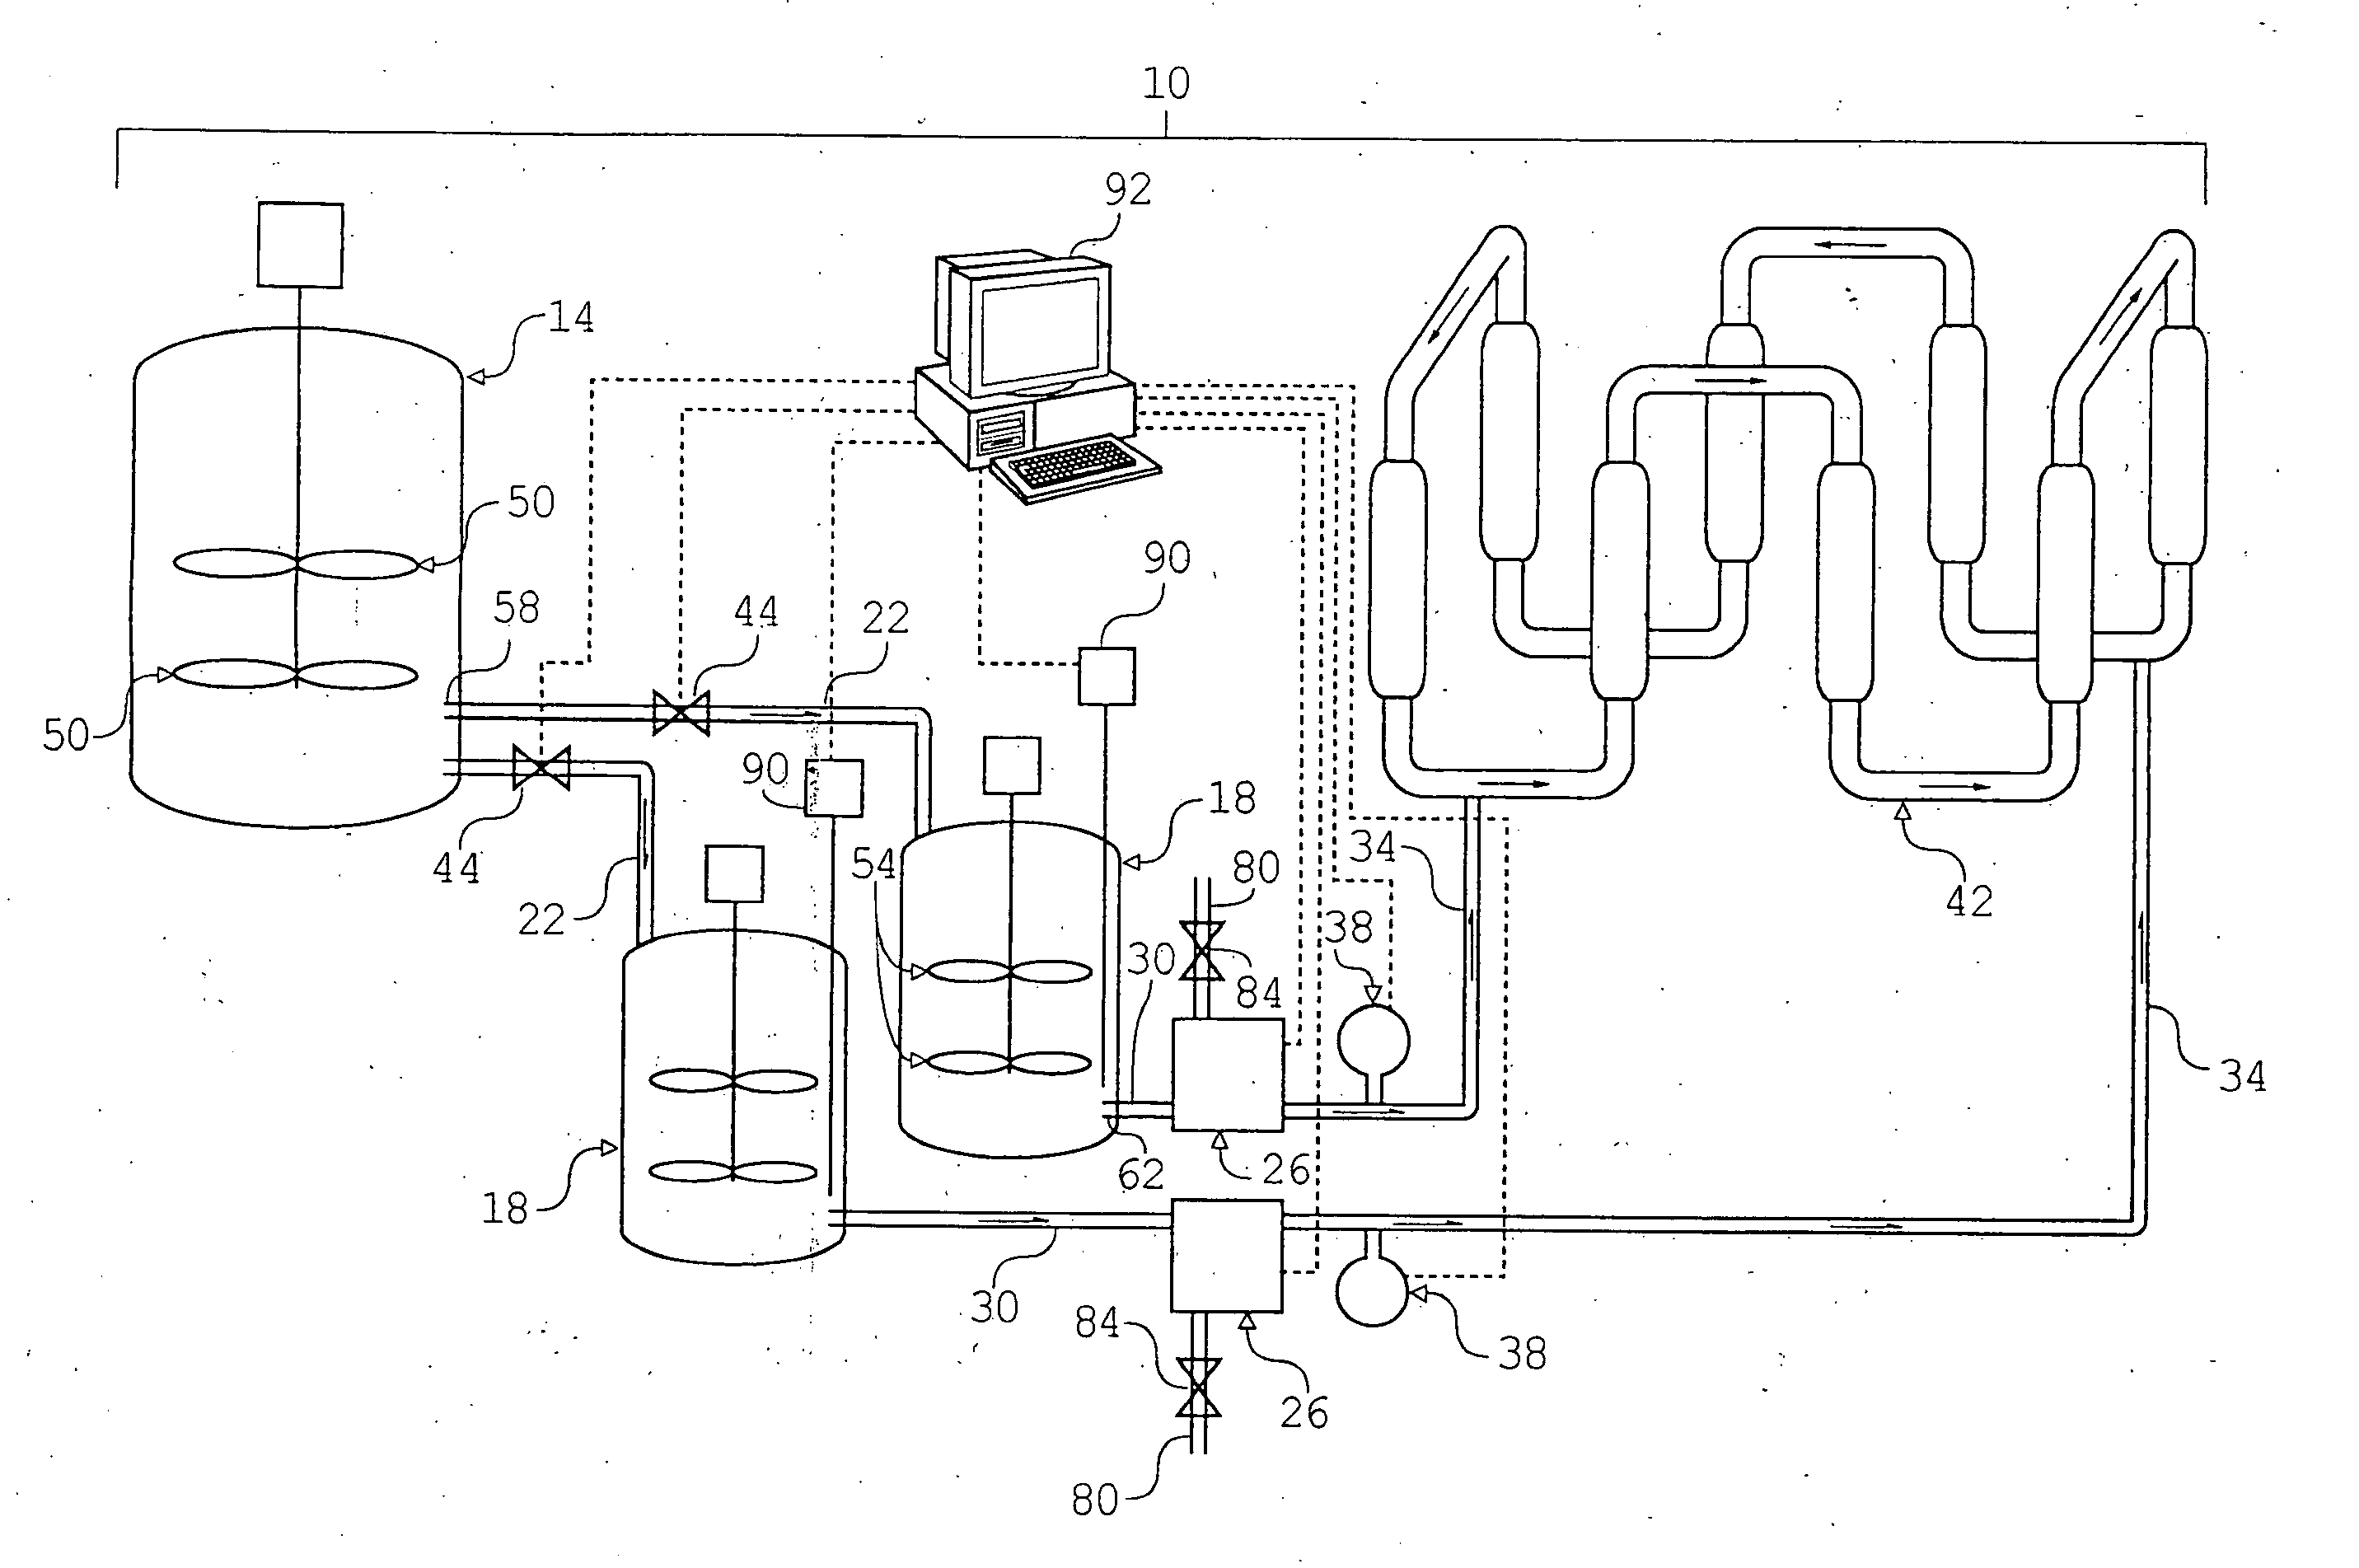 Catalyst slurry feeding assembly for a polymerization reactor